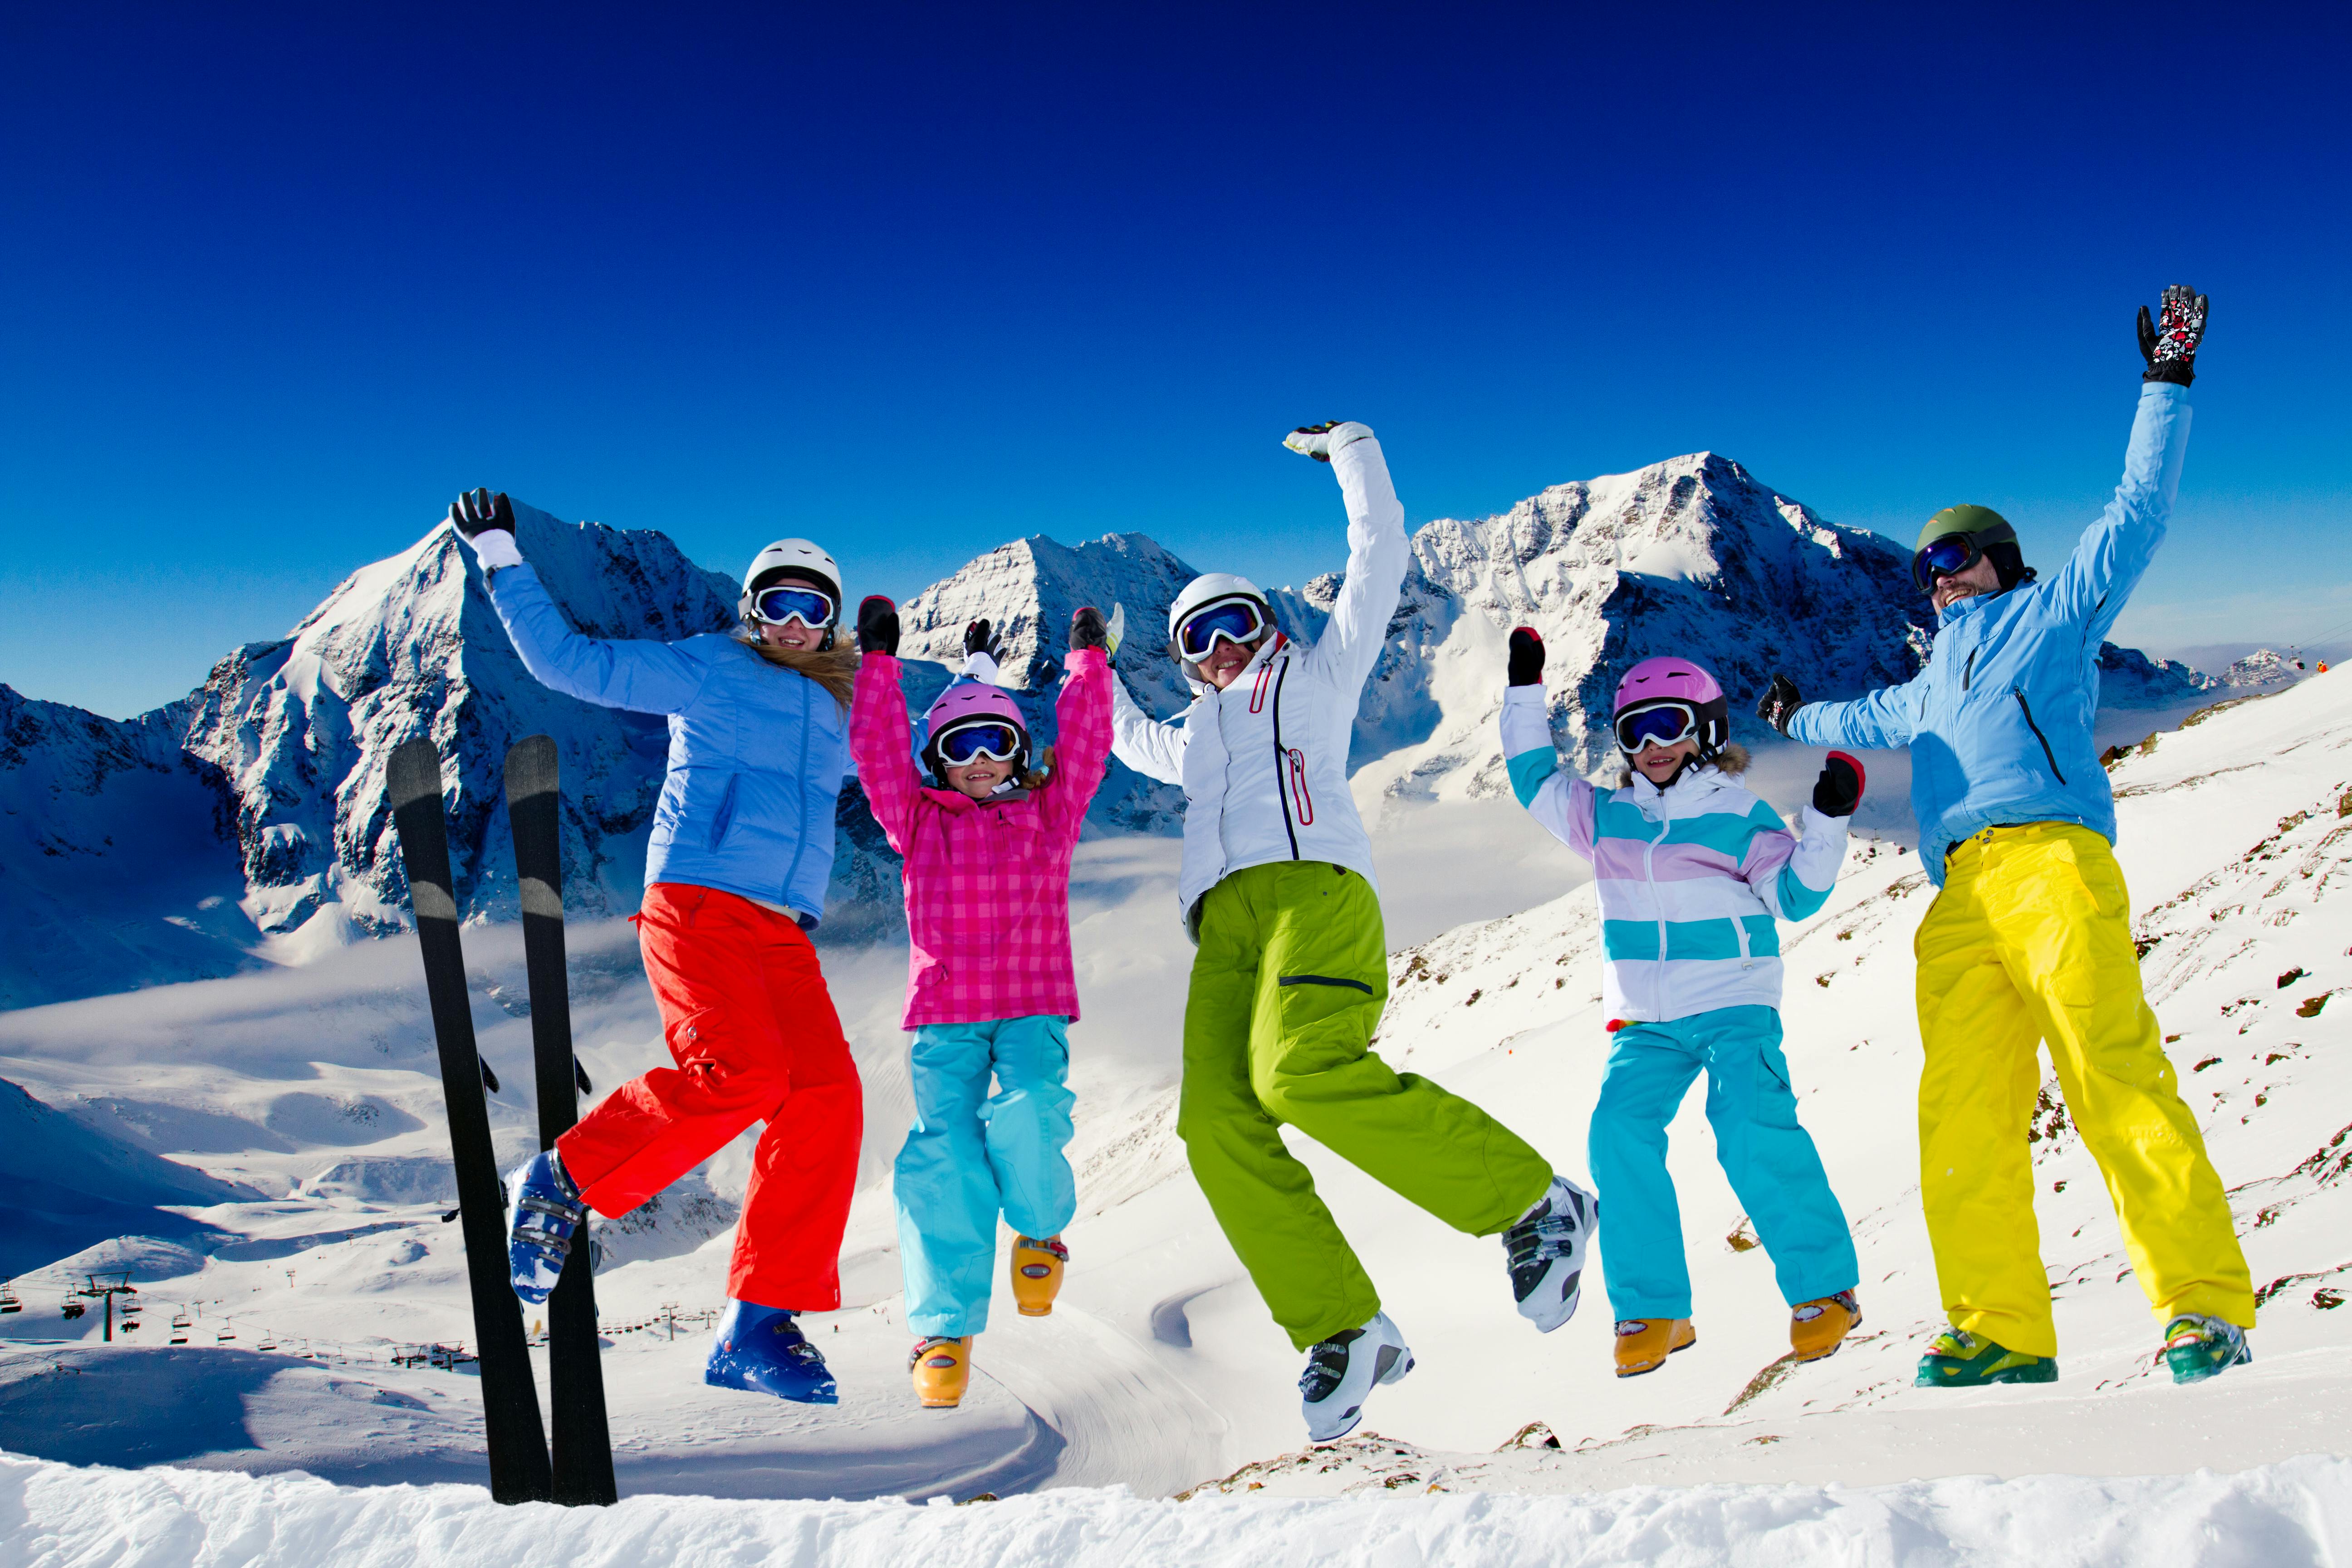 Best Ski Pants for Women: 8 Options to Help You Look Cool and Stay Warm